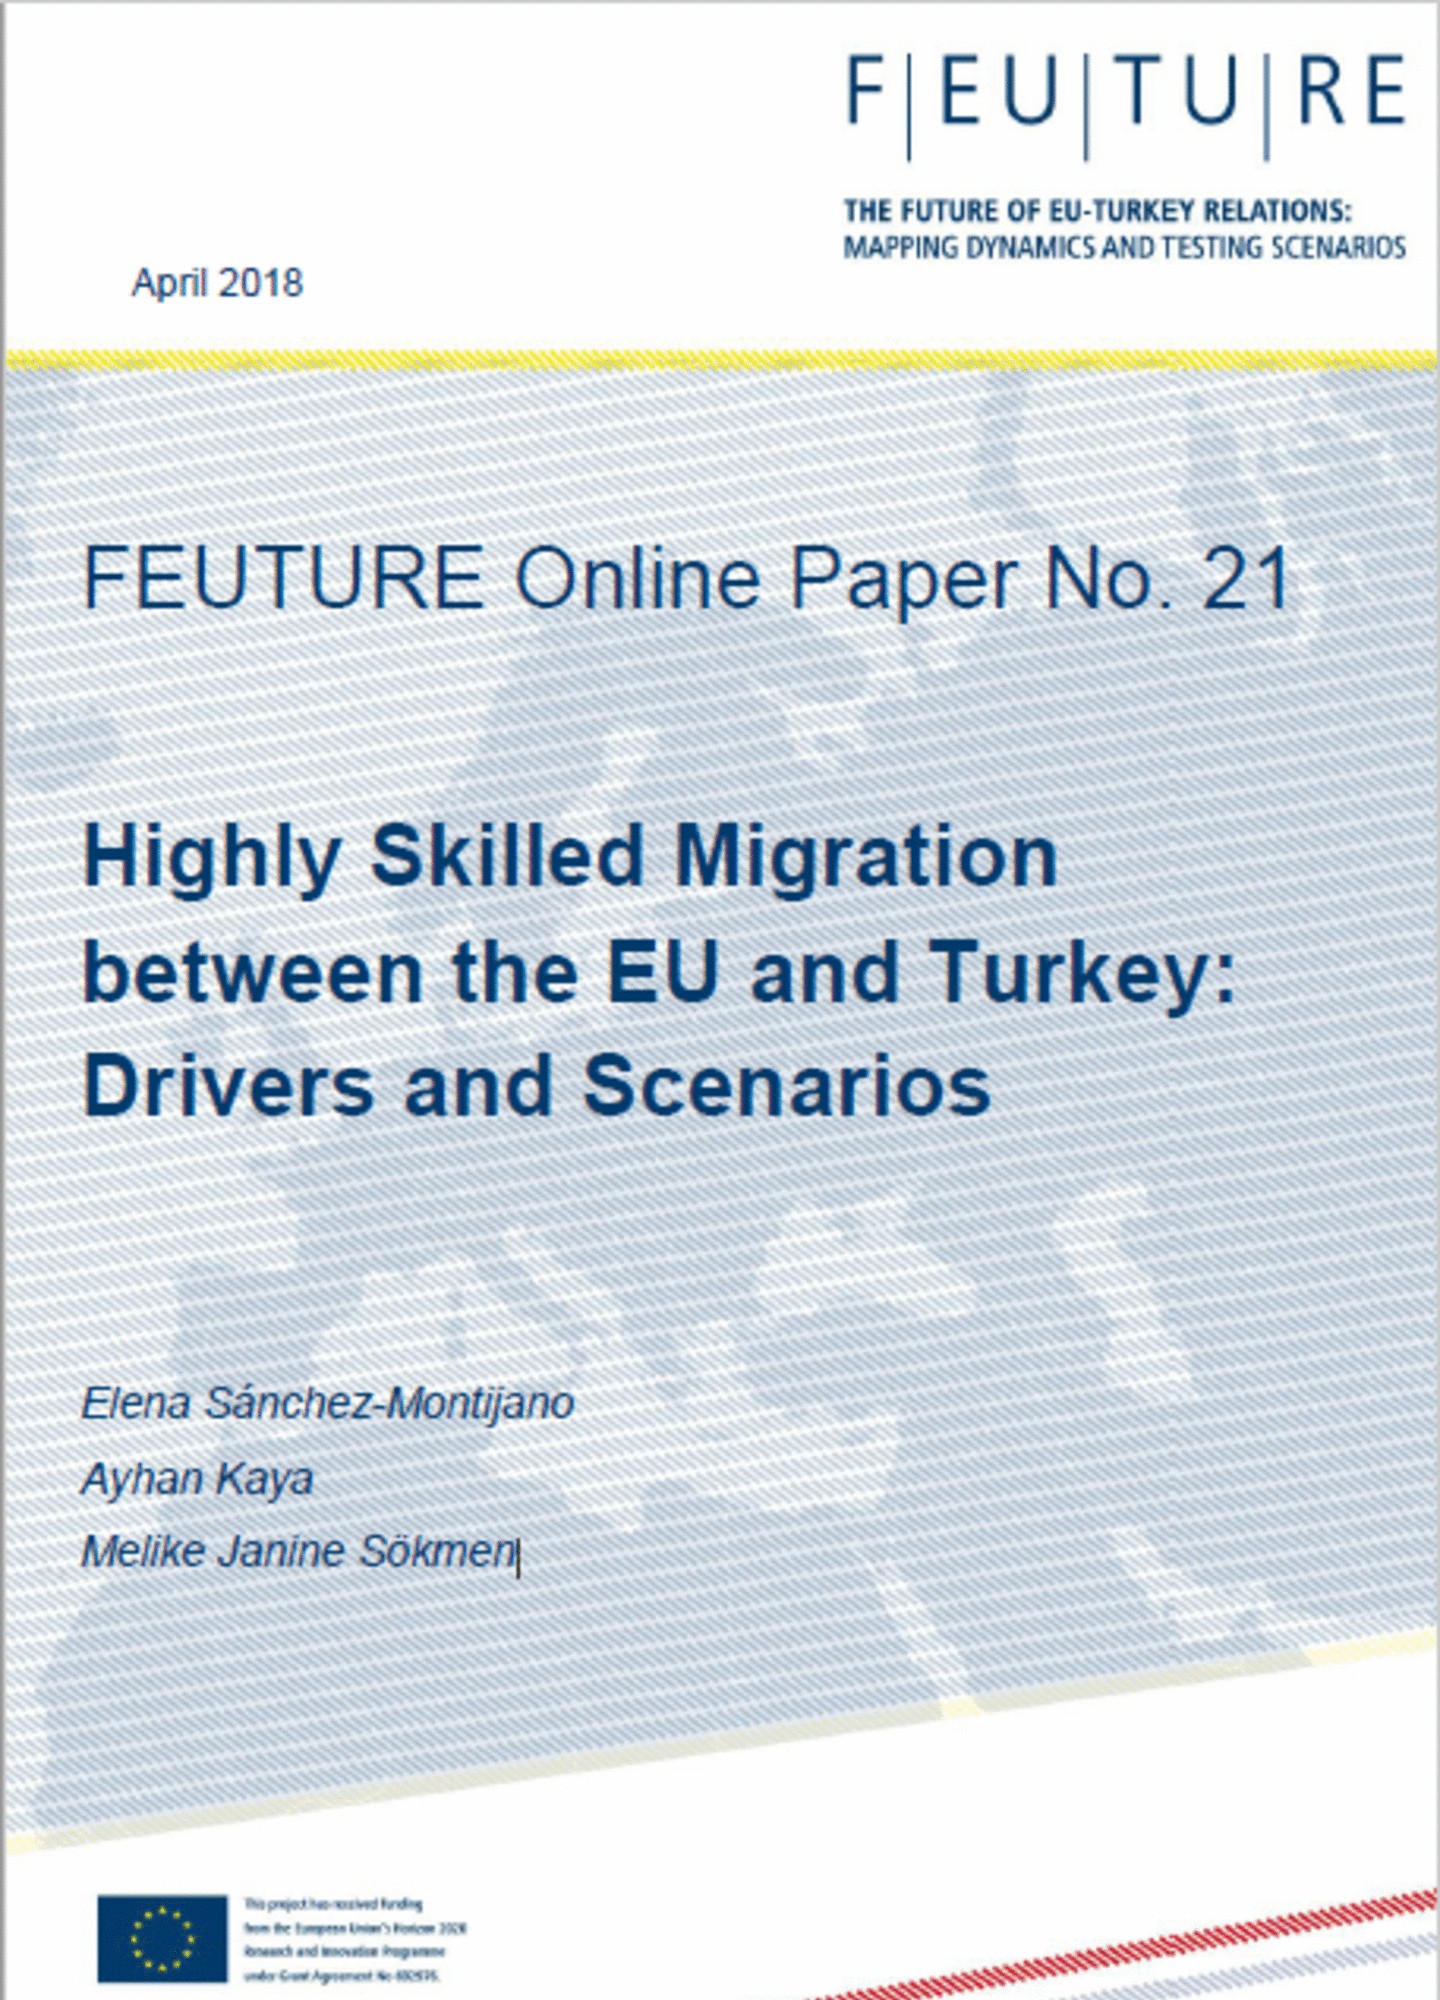 Highly Skilled Migration between the EU and Turkey: Drivers and Scenarios